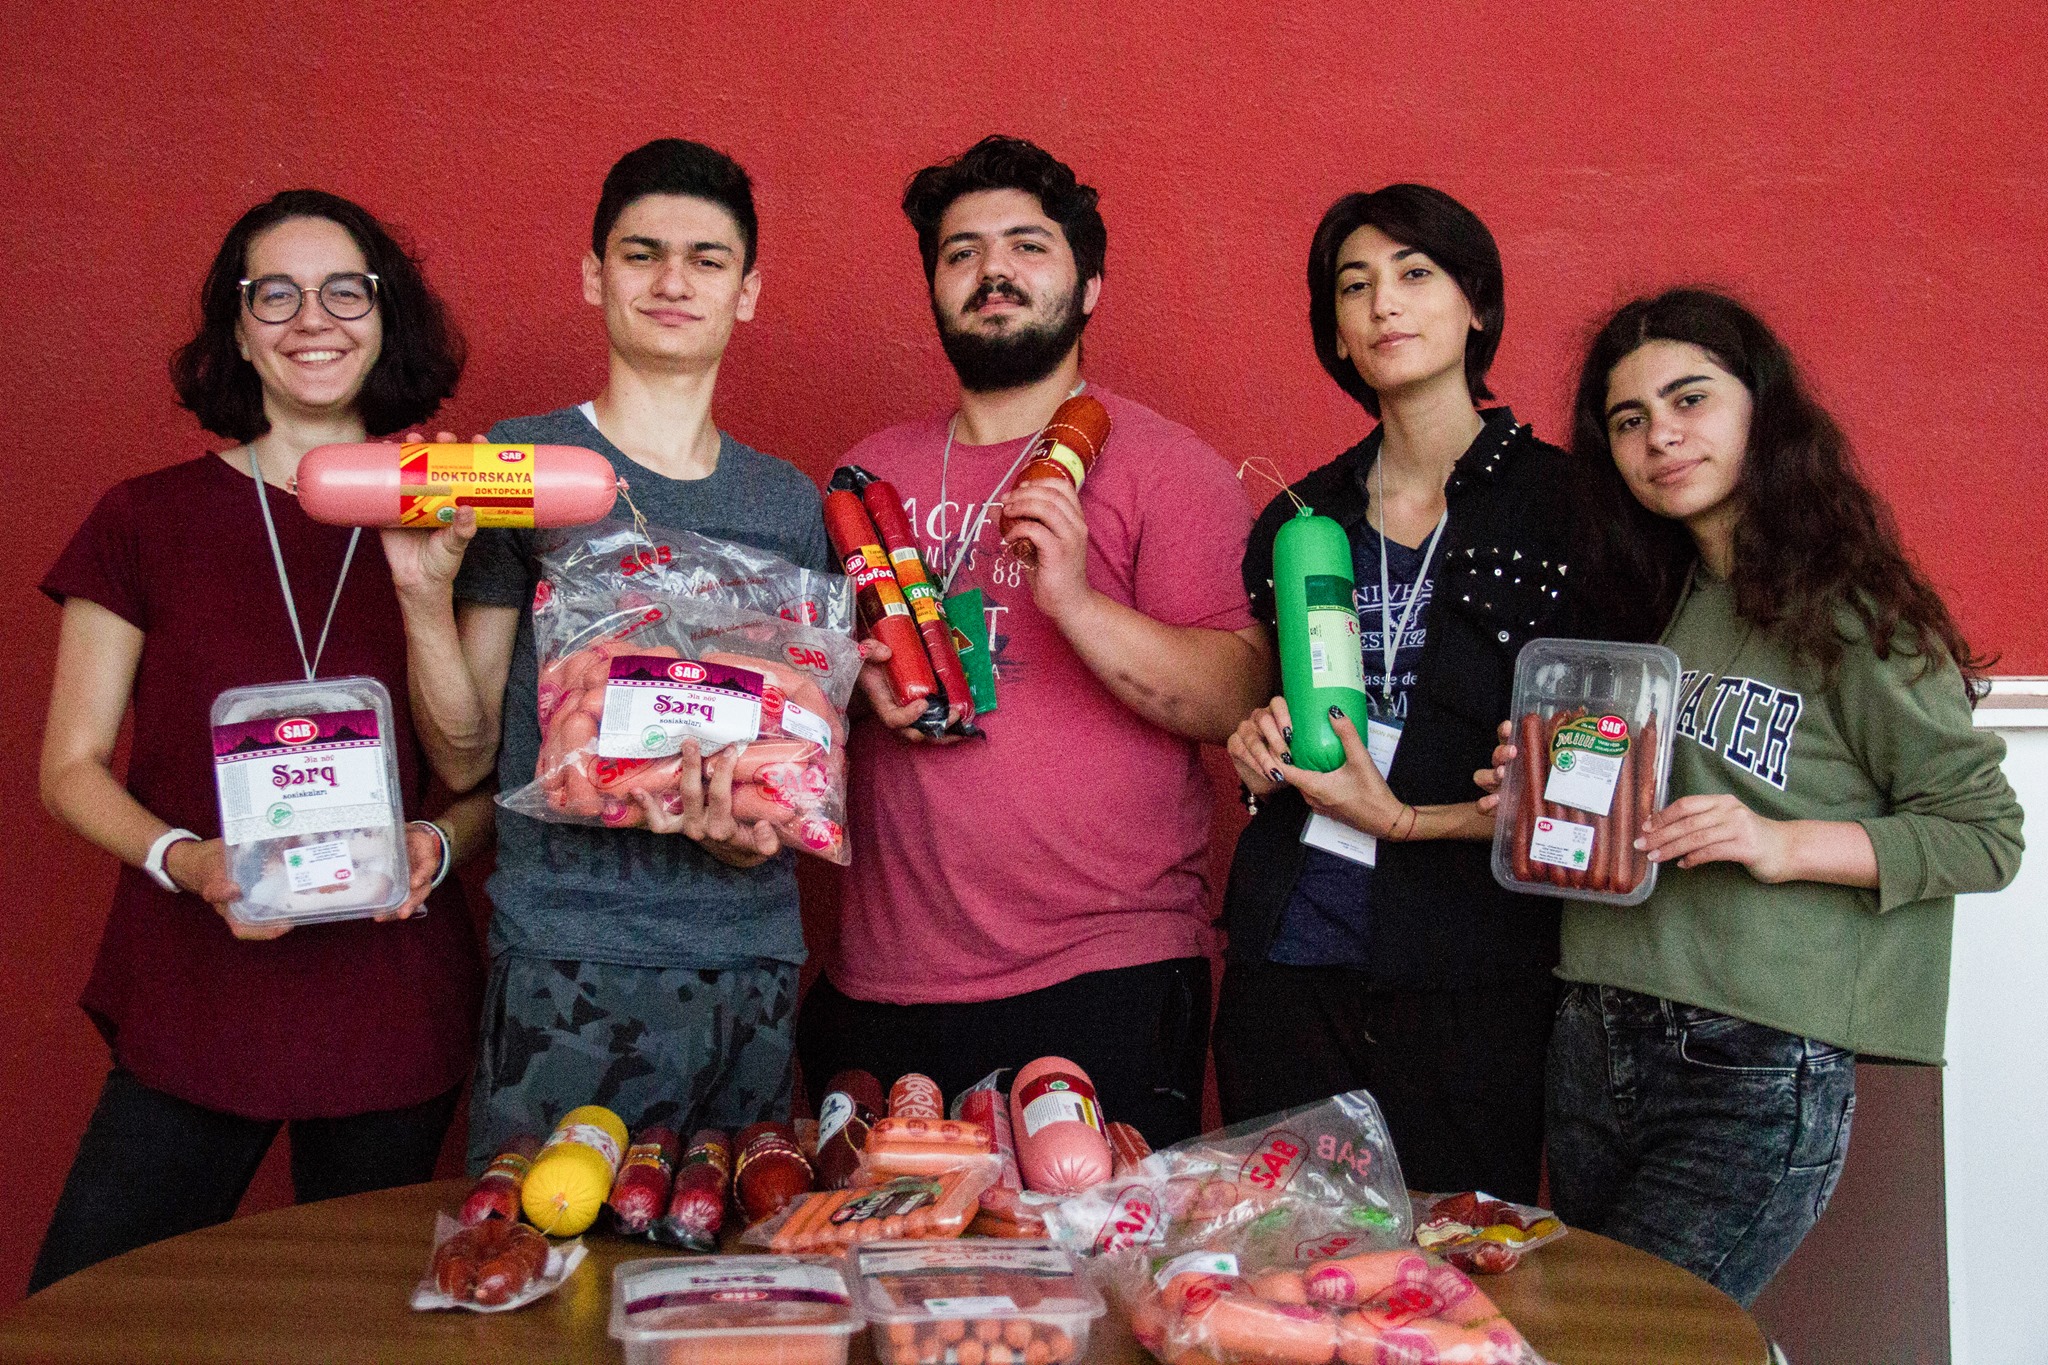 “Zahmat-Ruzi” LLC provided support to young people during the 2nd International Summer Camp.